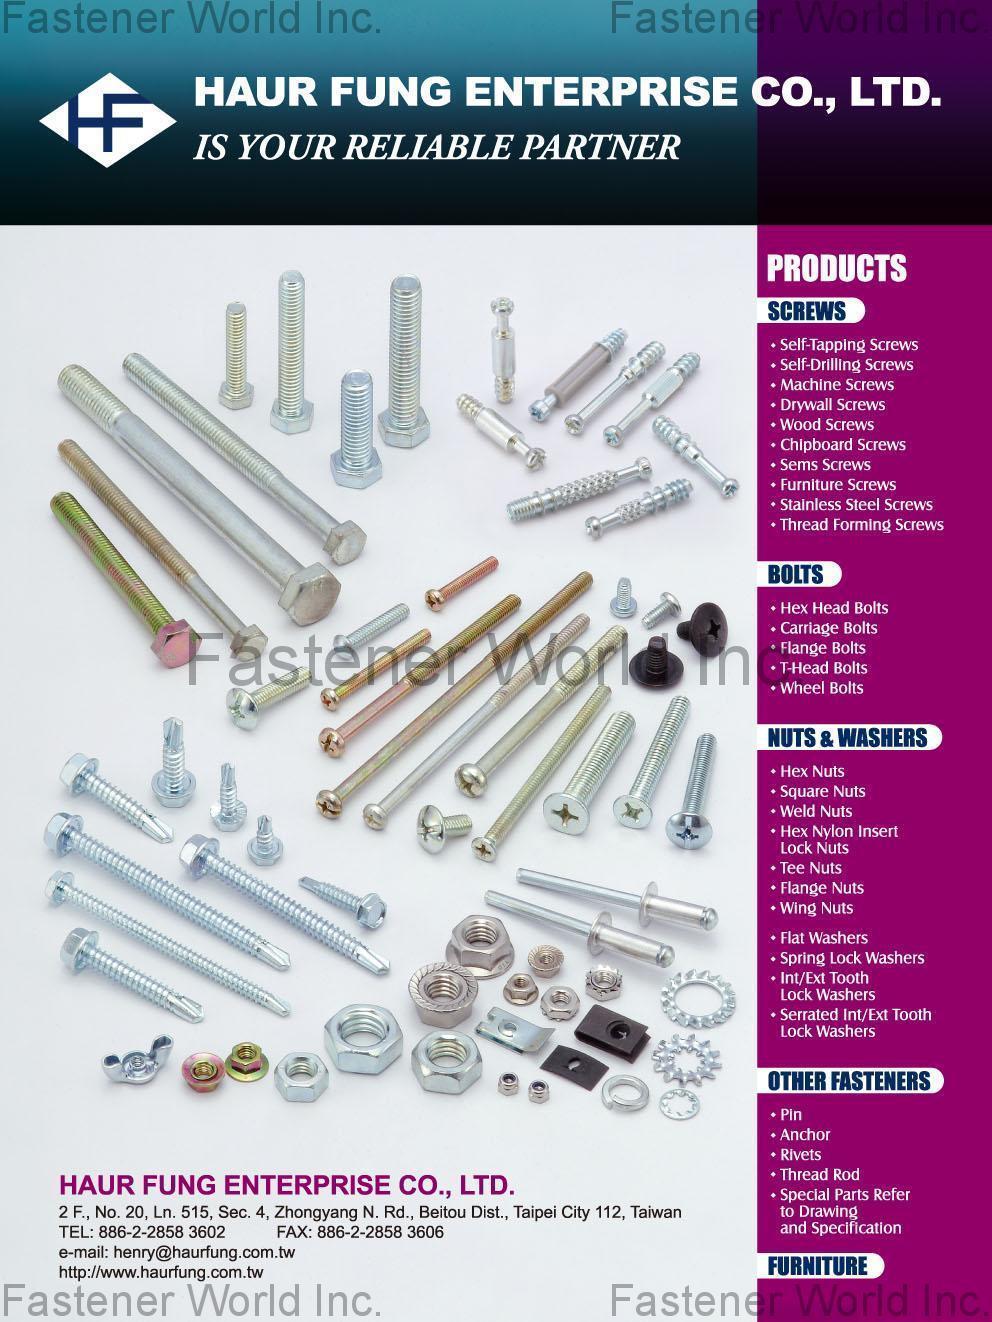 Self-Tapping Screws SCREWS, SELF-DRILLING SCREWS, MACHINE SCREWS, DRYWALL SCREWS, WOOD SCREWS, CHIPBOARD SCREWS, SEMS SCREWS, FURNITURE SCREWS, STAINLESS STEEL SCREWS, THREAD FORMING SCREWS, BOLTS, HEX HEAD BOLTS, CARRIAGE BOLTS, FLANGE BOLTS, T-HEAD BOLTS, WHEEL BOLTS, NUTS, WASHERS, HEX NUTS, SQUARE NUTS, WELD NUTS, HEX NYLON INSERTS LOCK NUTS, TEE NUTS, FLANGE NUTS, WING NUTS, FLAT WASHERS, SPRING LOCK WASHERS, INT/EXT TOOTH LOCK WASHERS, SERRATED INT/EXT TOOTH LOCK WASHERS, FASTENERS, PINS, ANCHORS, RIVETS, THREAD RODS, SPECIAL PARTS AS PER DRAWING AND SPECIFICATION